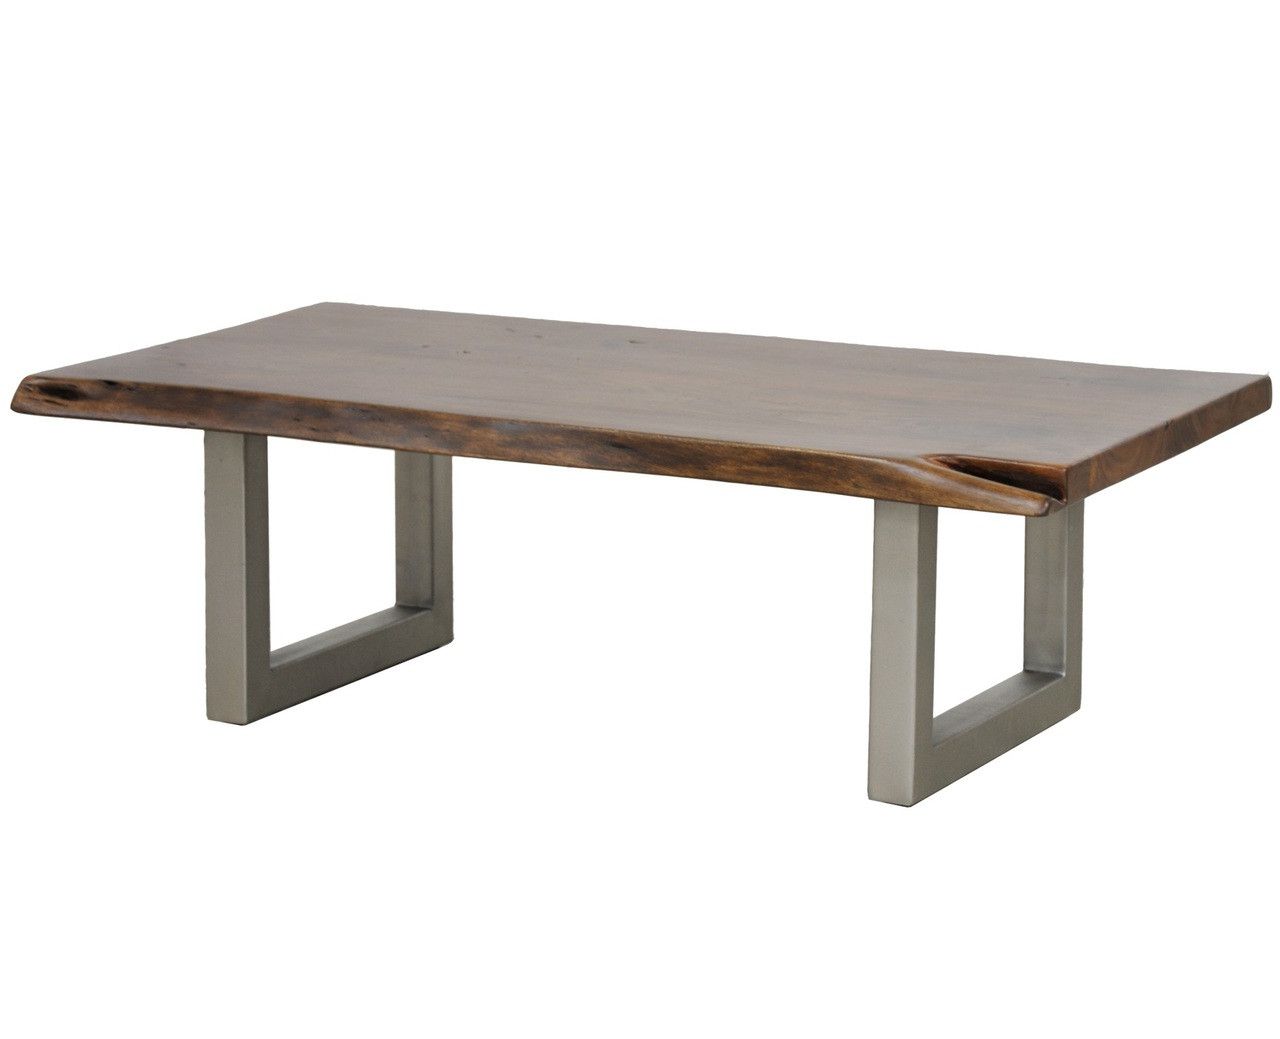 Montana Solid Wood Metal Leg Coffee Table | Zin Home Throughout Coffee Tables With Solid Legs (View 8 of 20)